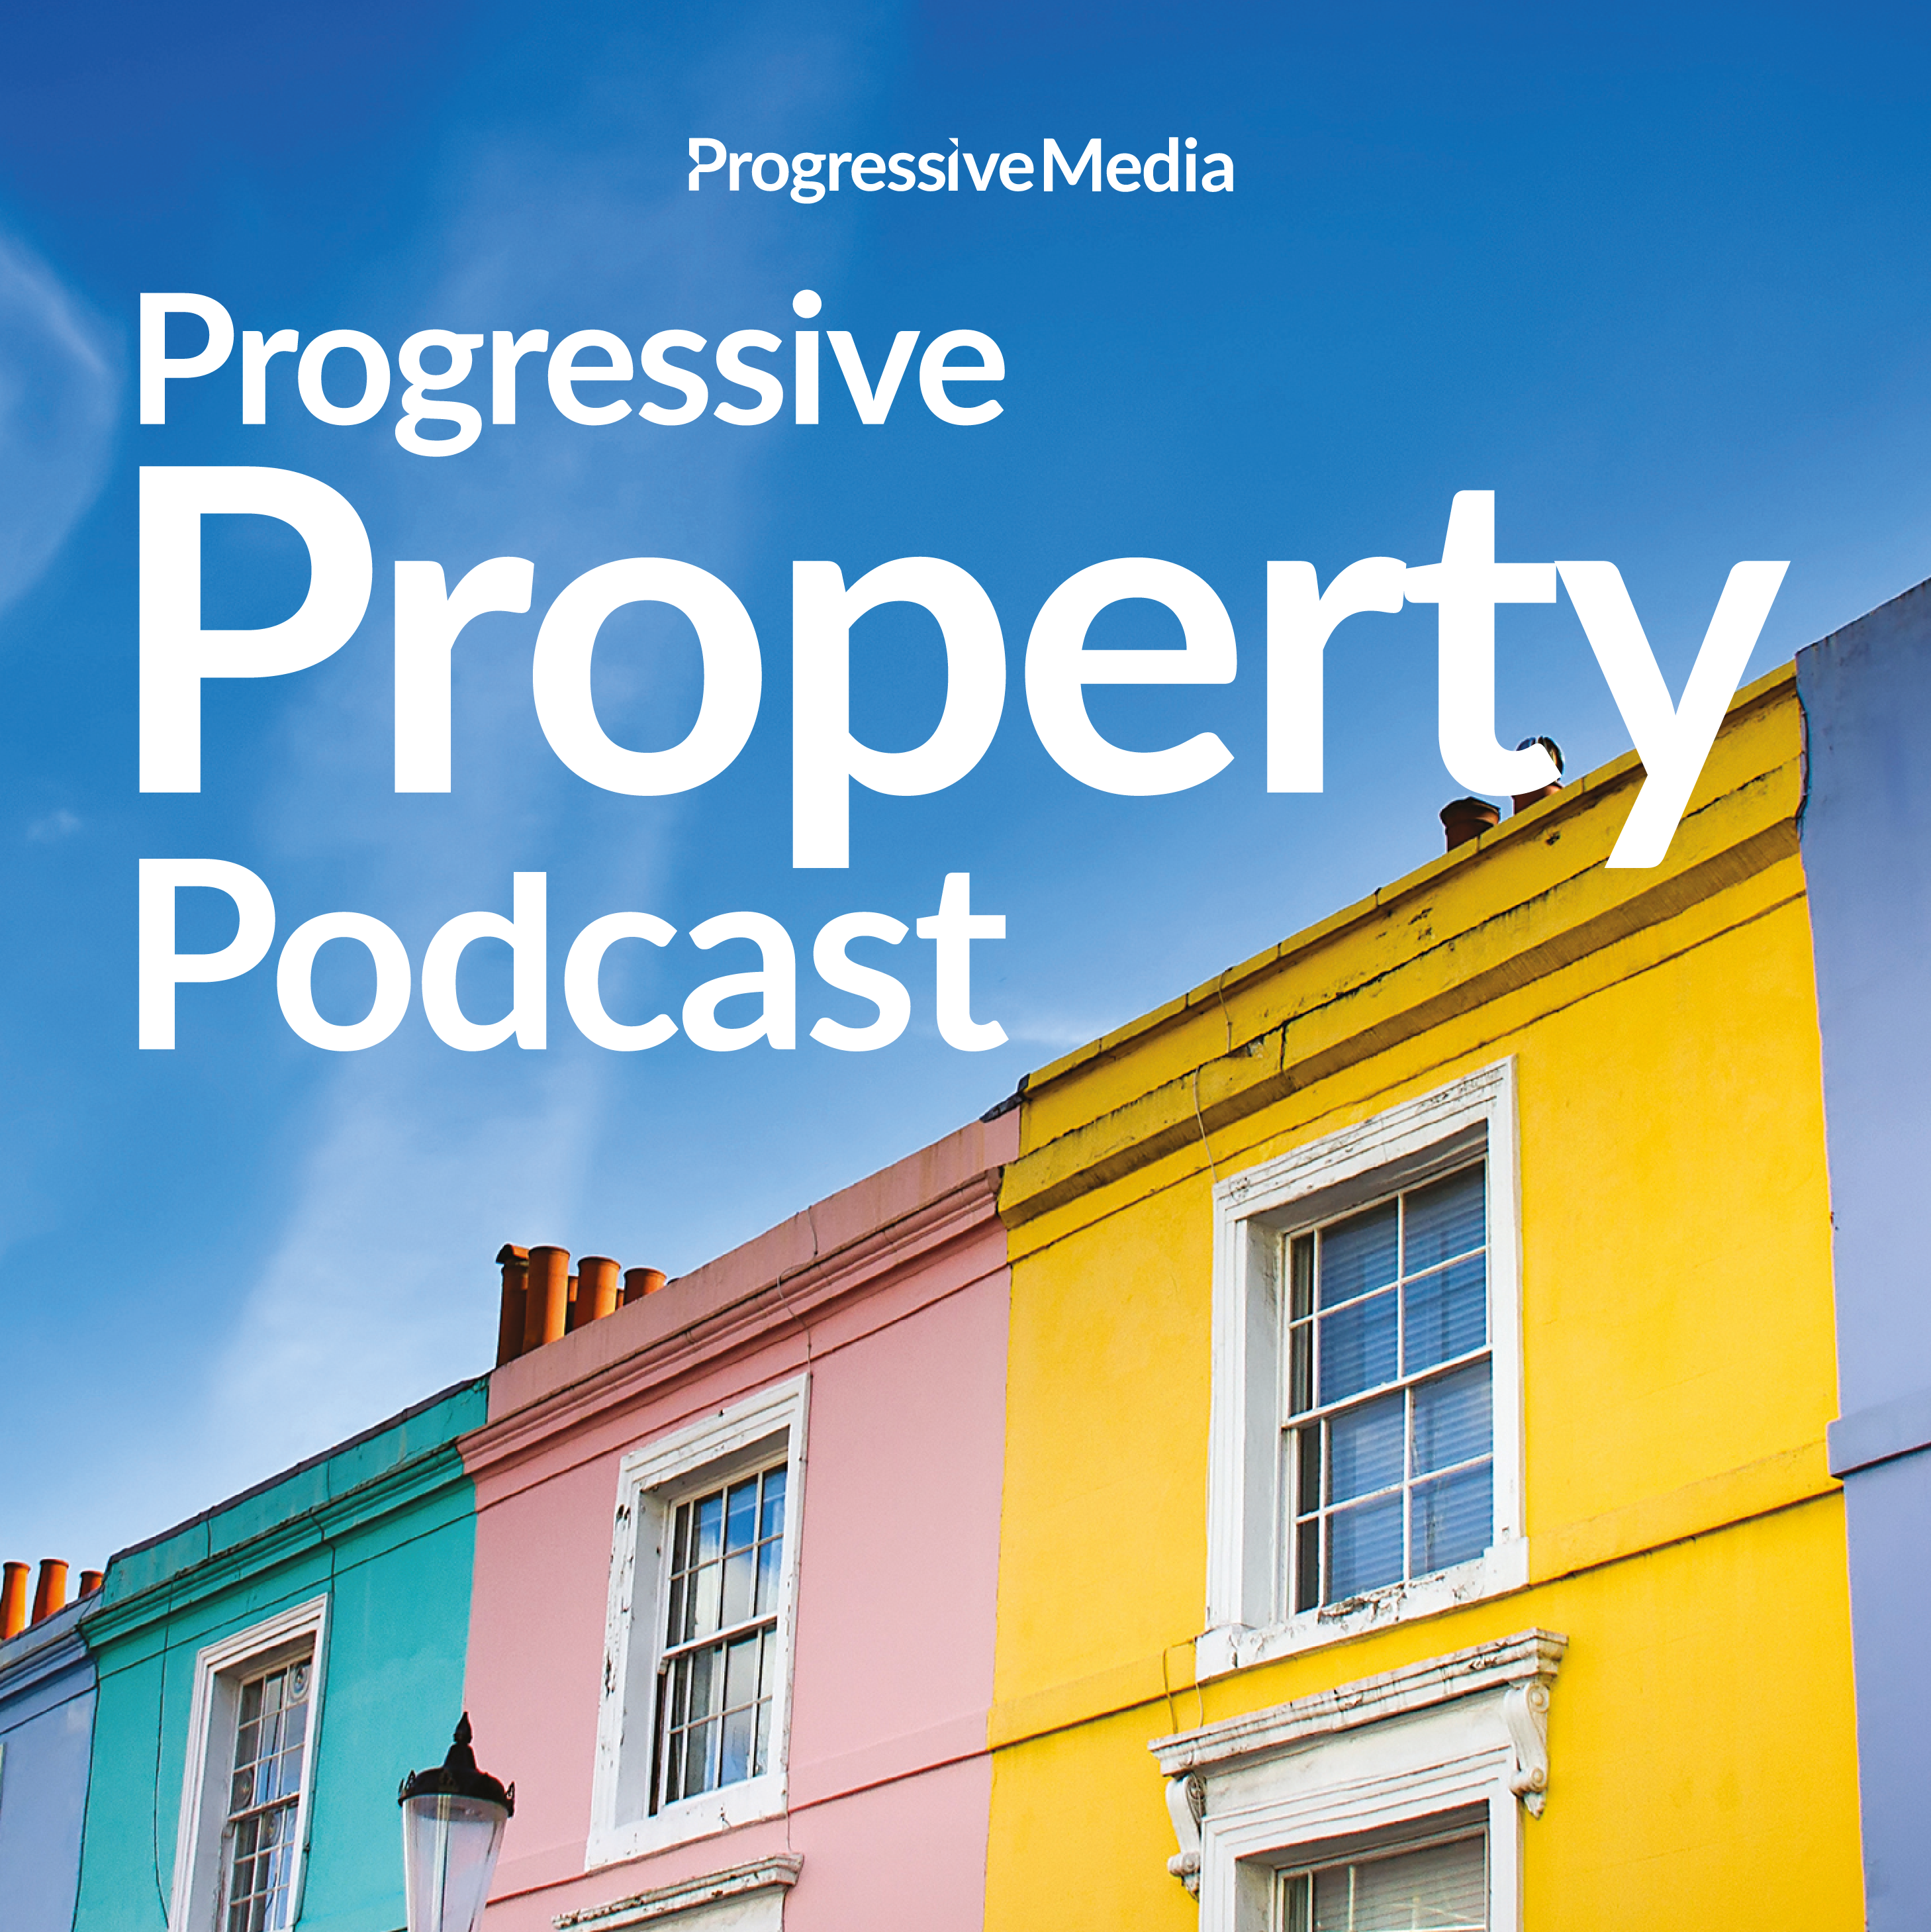 How Progressive Property Helped Build My Success - with Sam Waterson